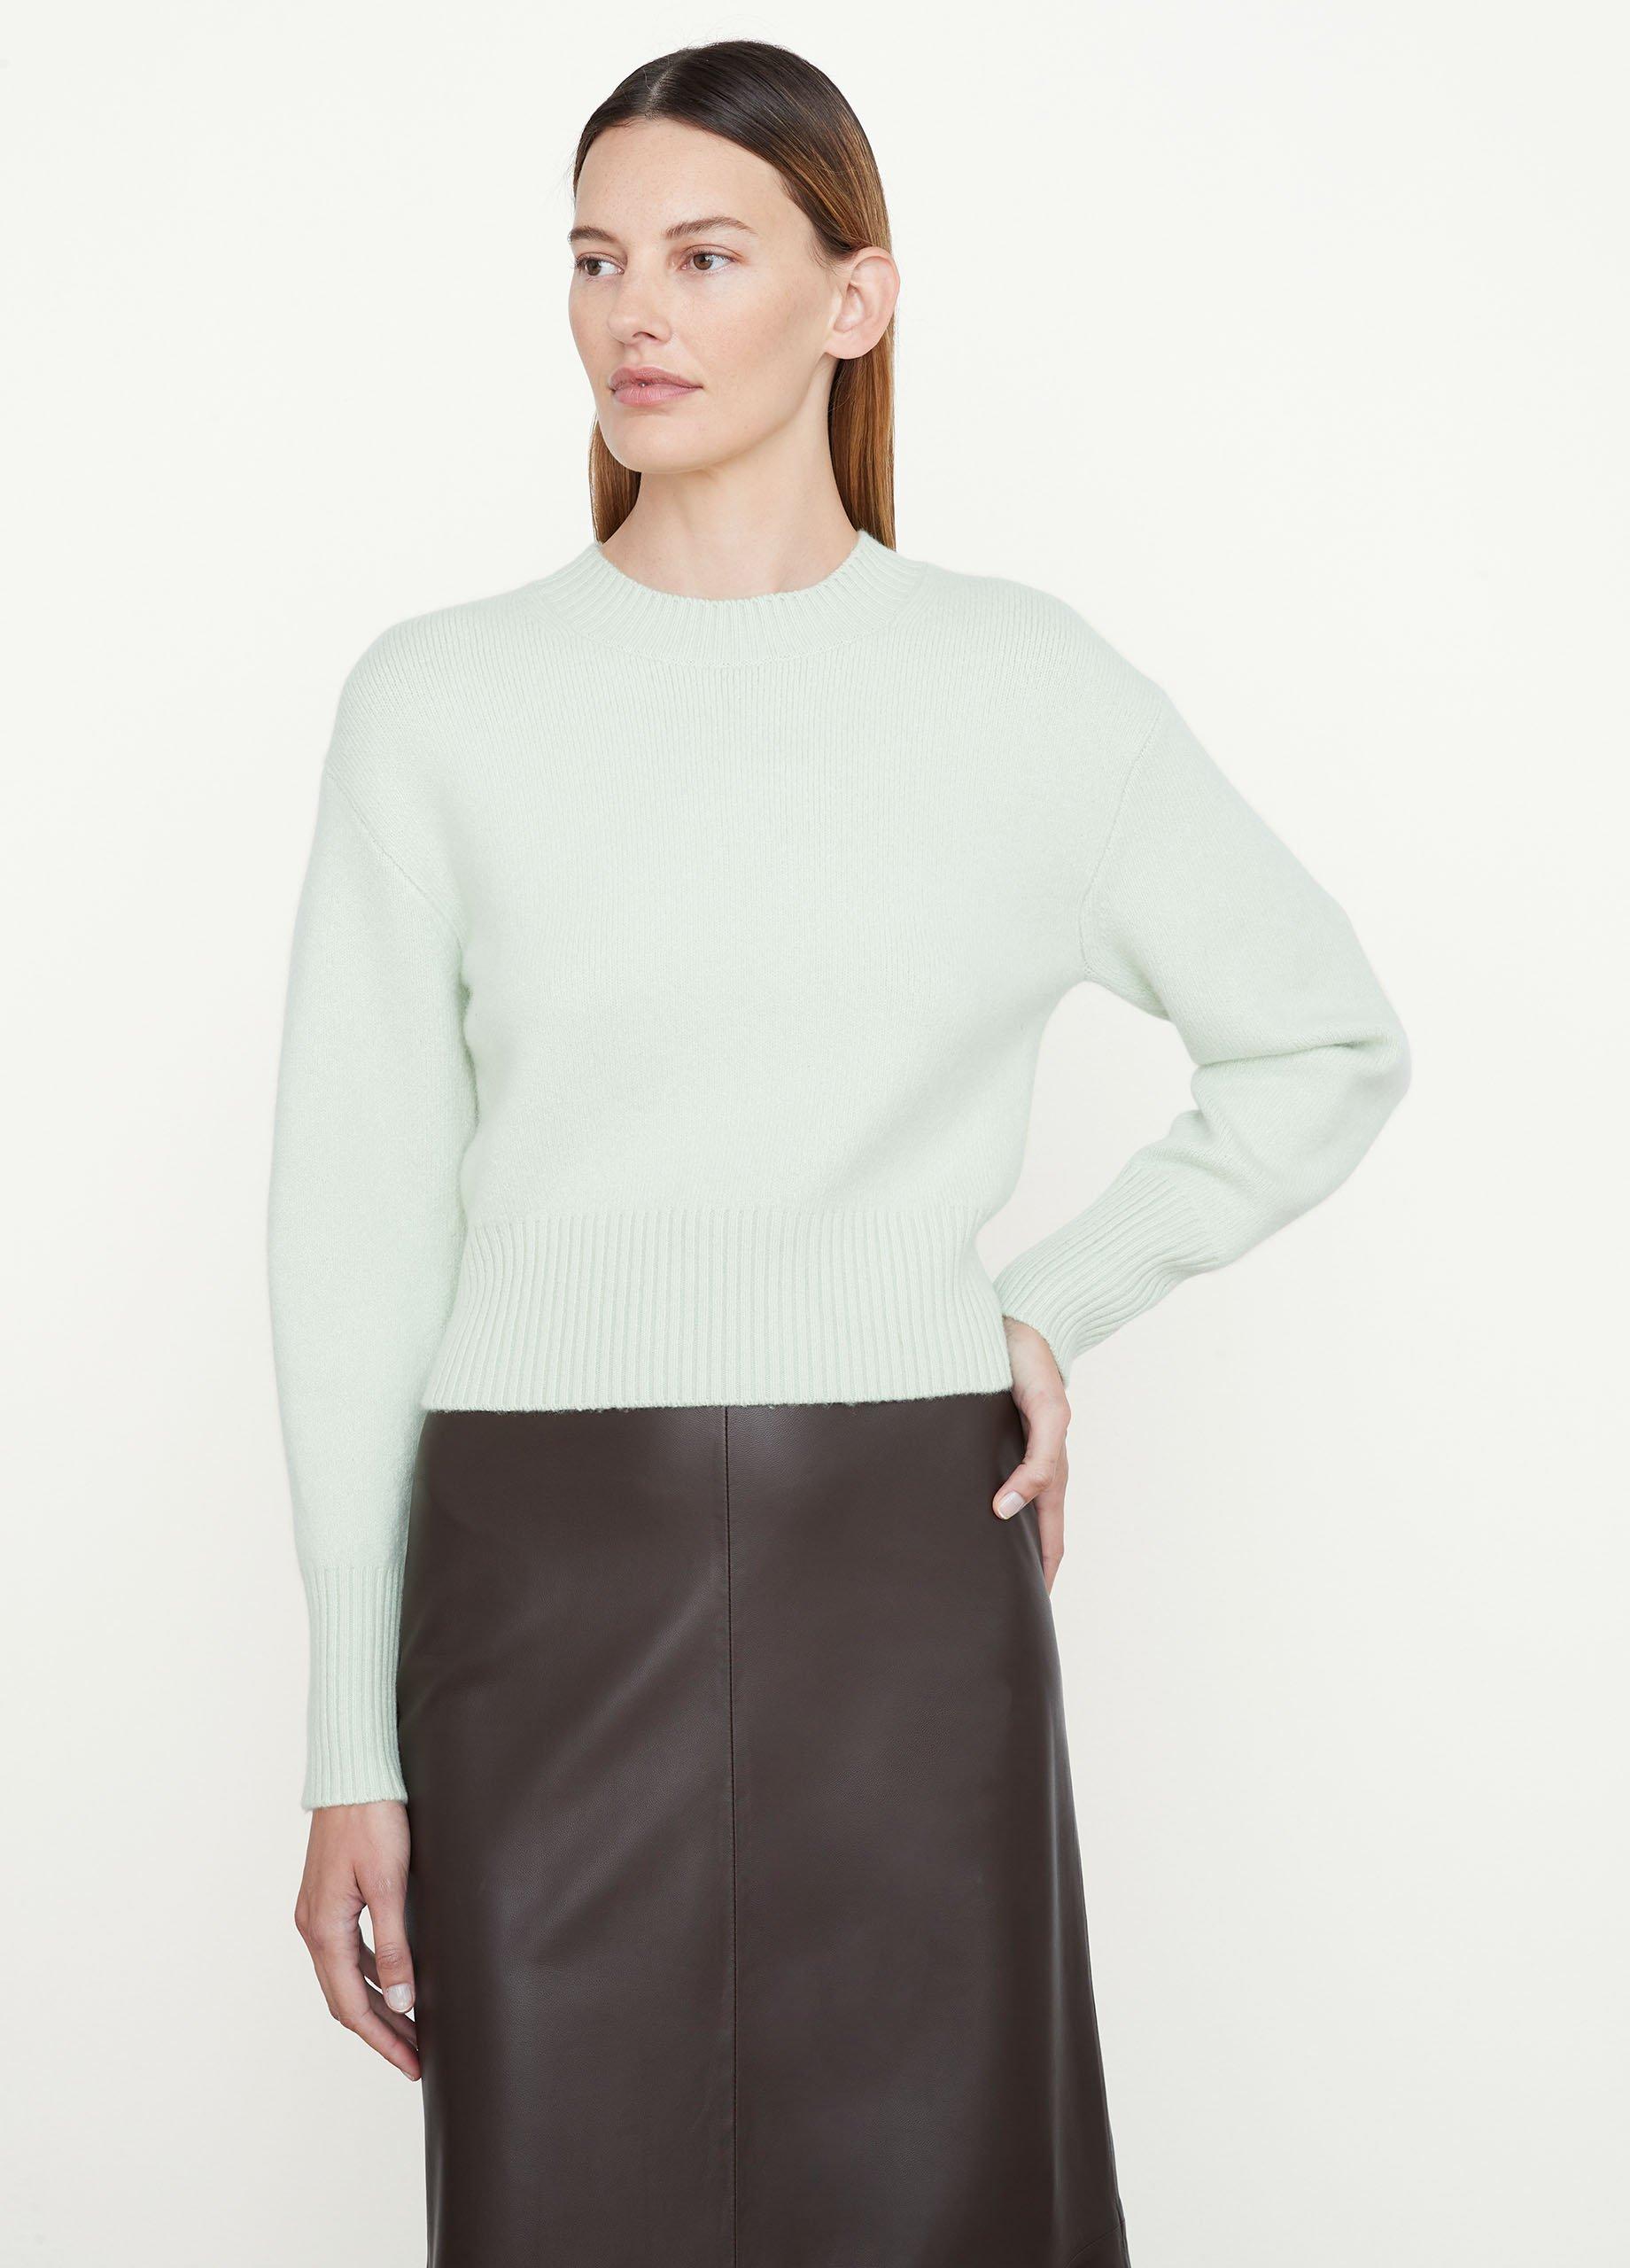 Wide-Sleeve Crew Neck Sweater in Vince Products Women | Vince